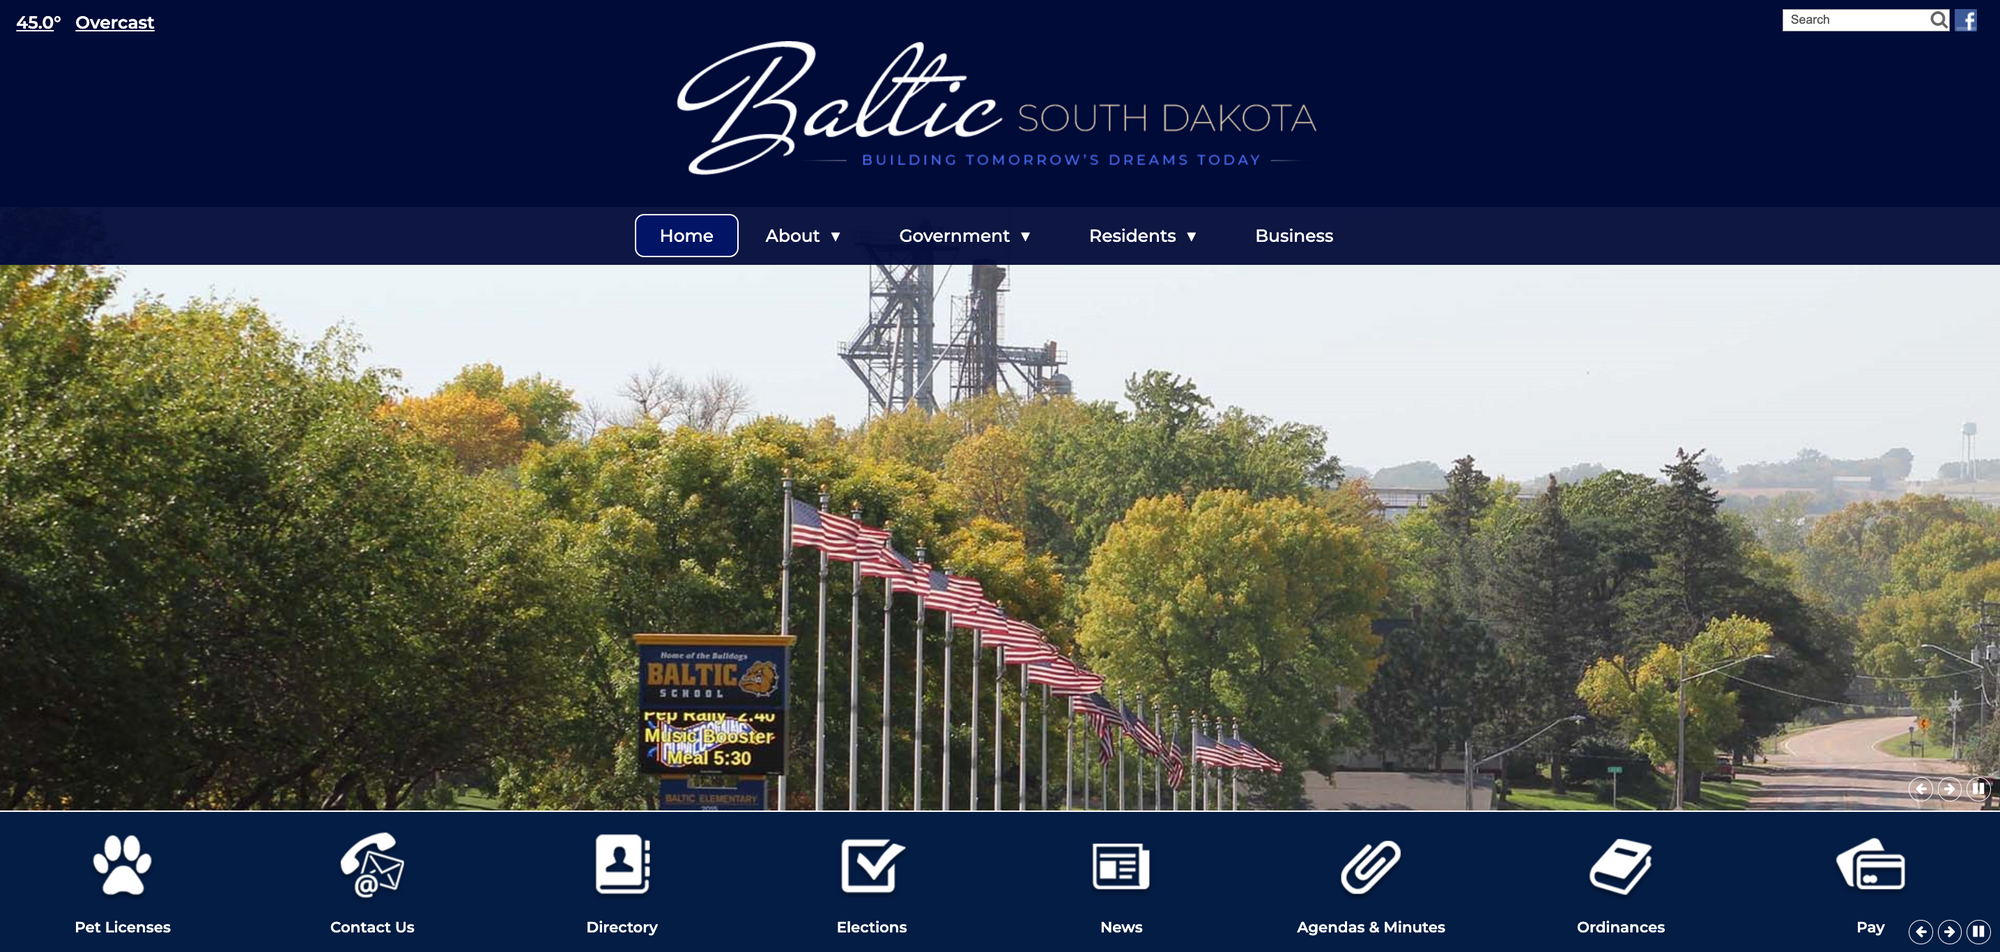 How Baltic's new website is making city info more accessible